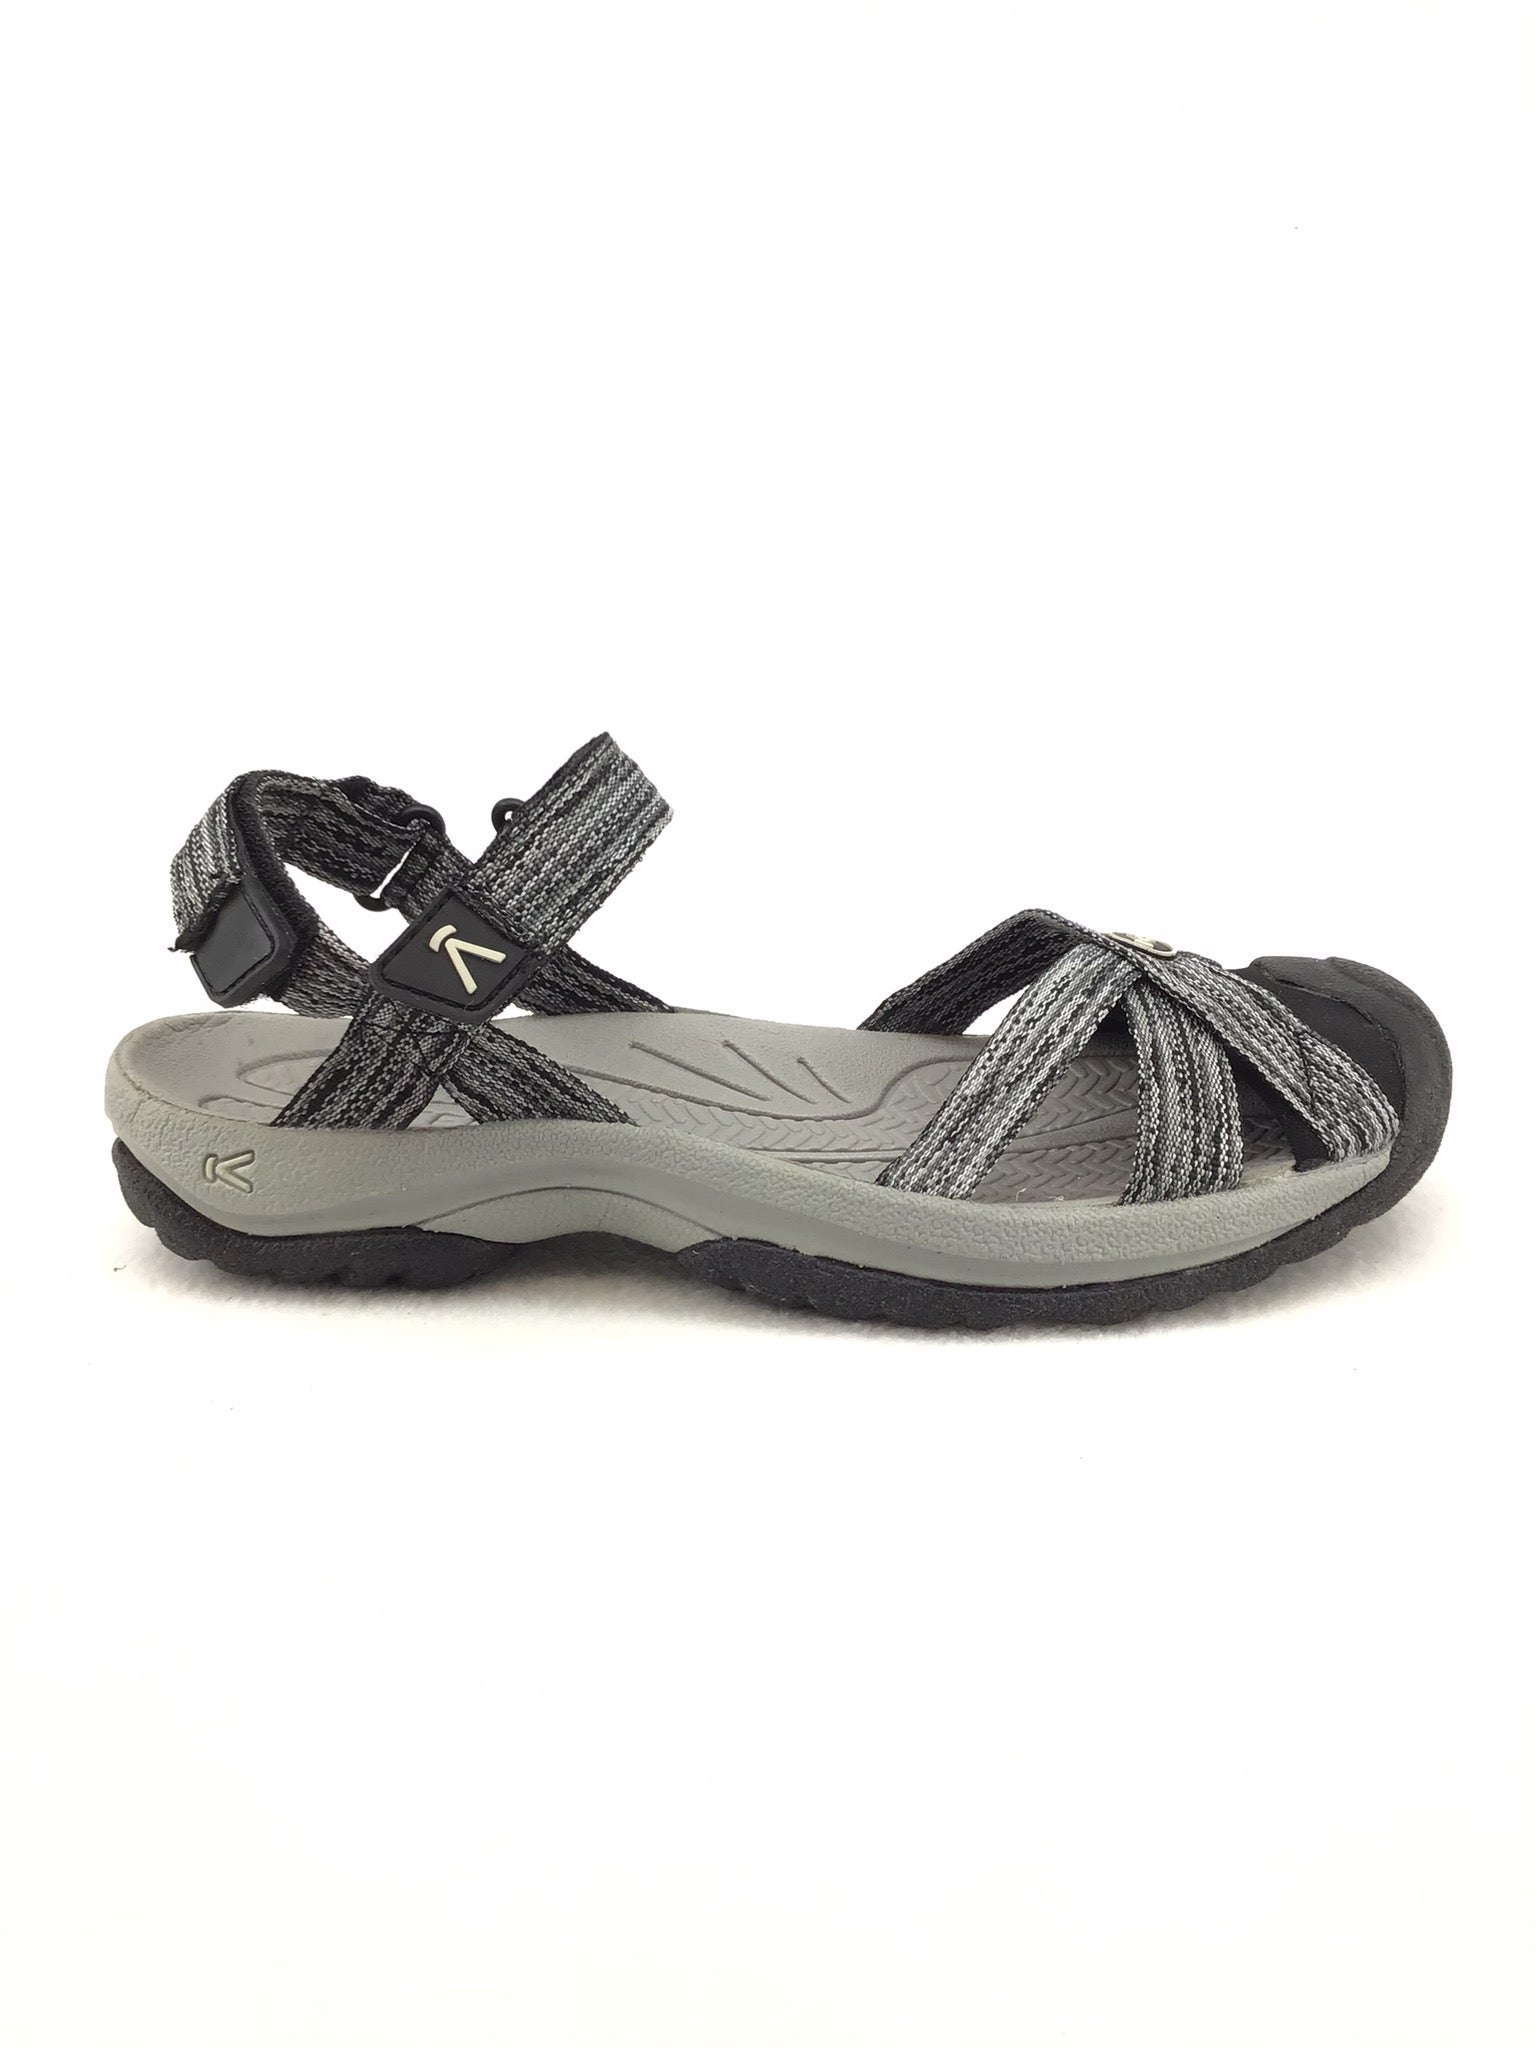 Keen Rose Sandal - Womens | FREE SHIPPING in Canada |